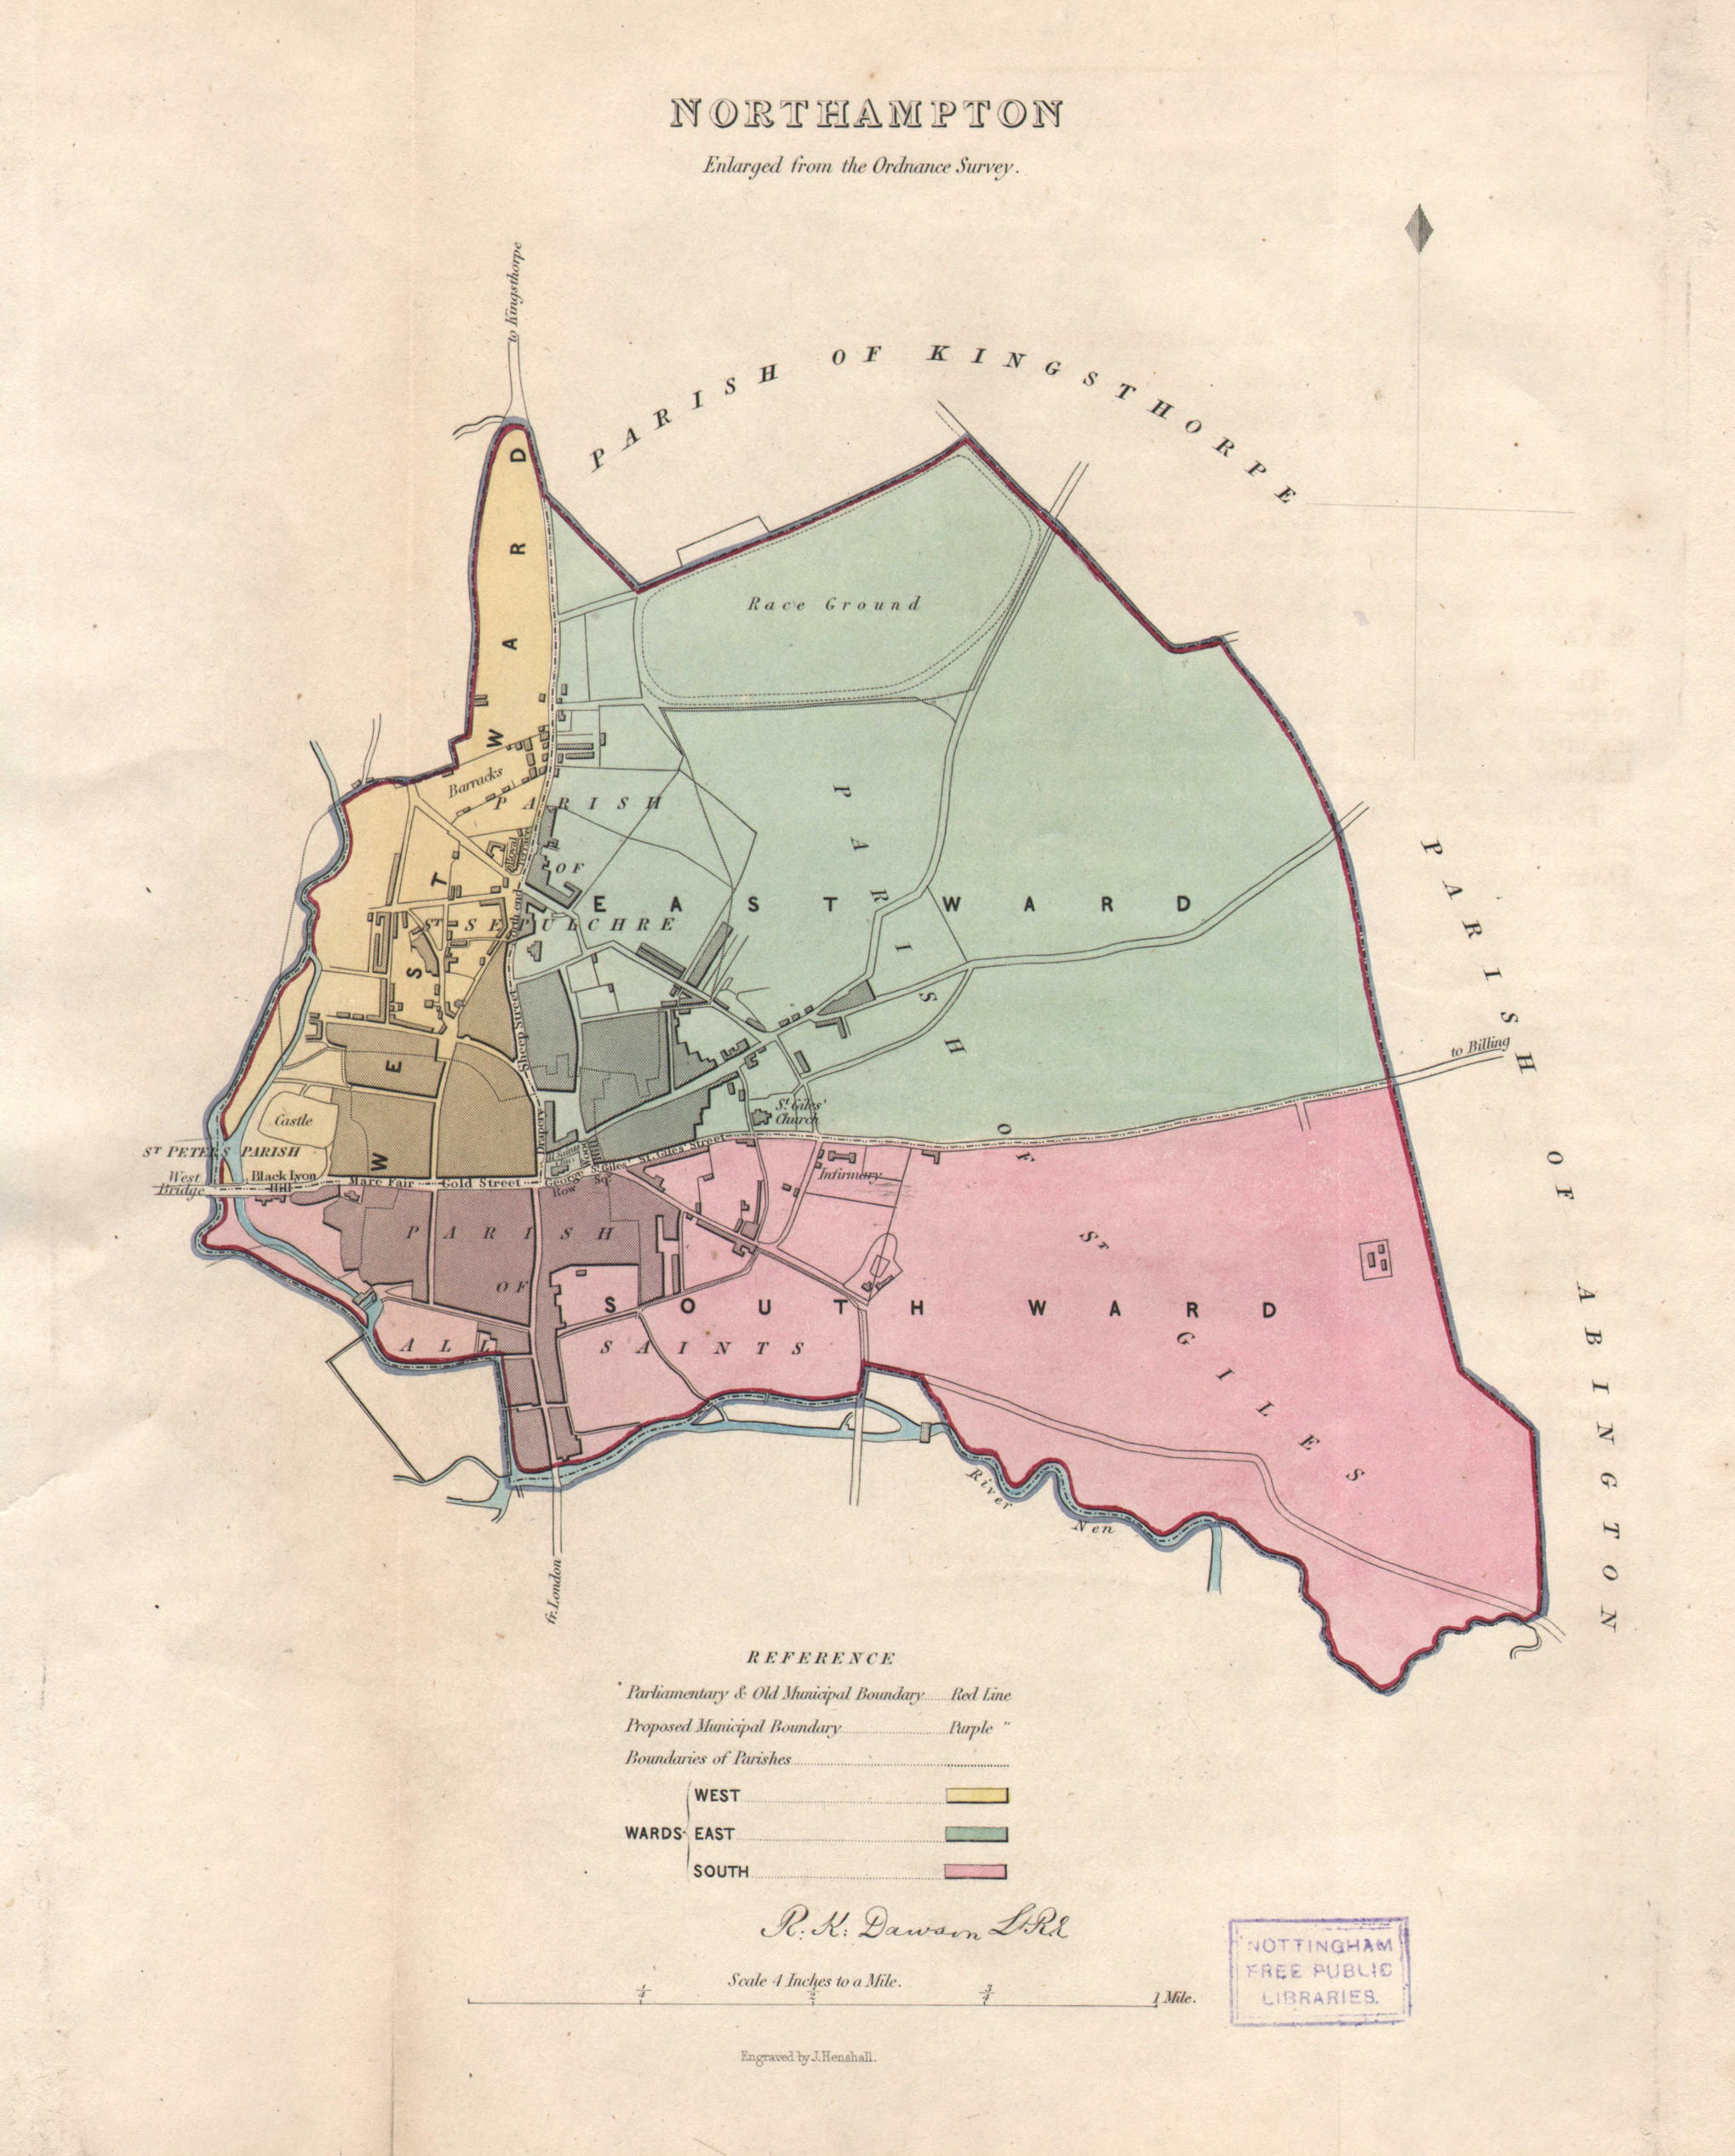 Associate Product NORTHAMPTON borough/town plan & Wards. BOUNDARY REVIEW. DAWSON 1837 old map